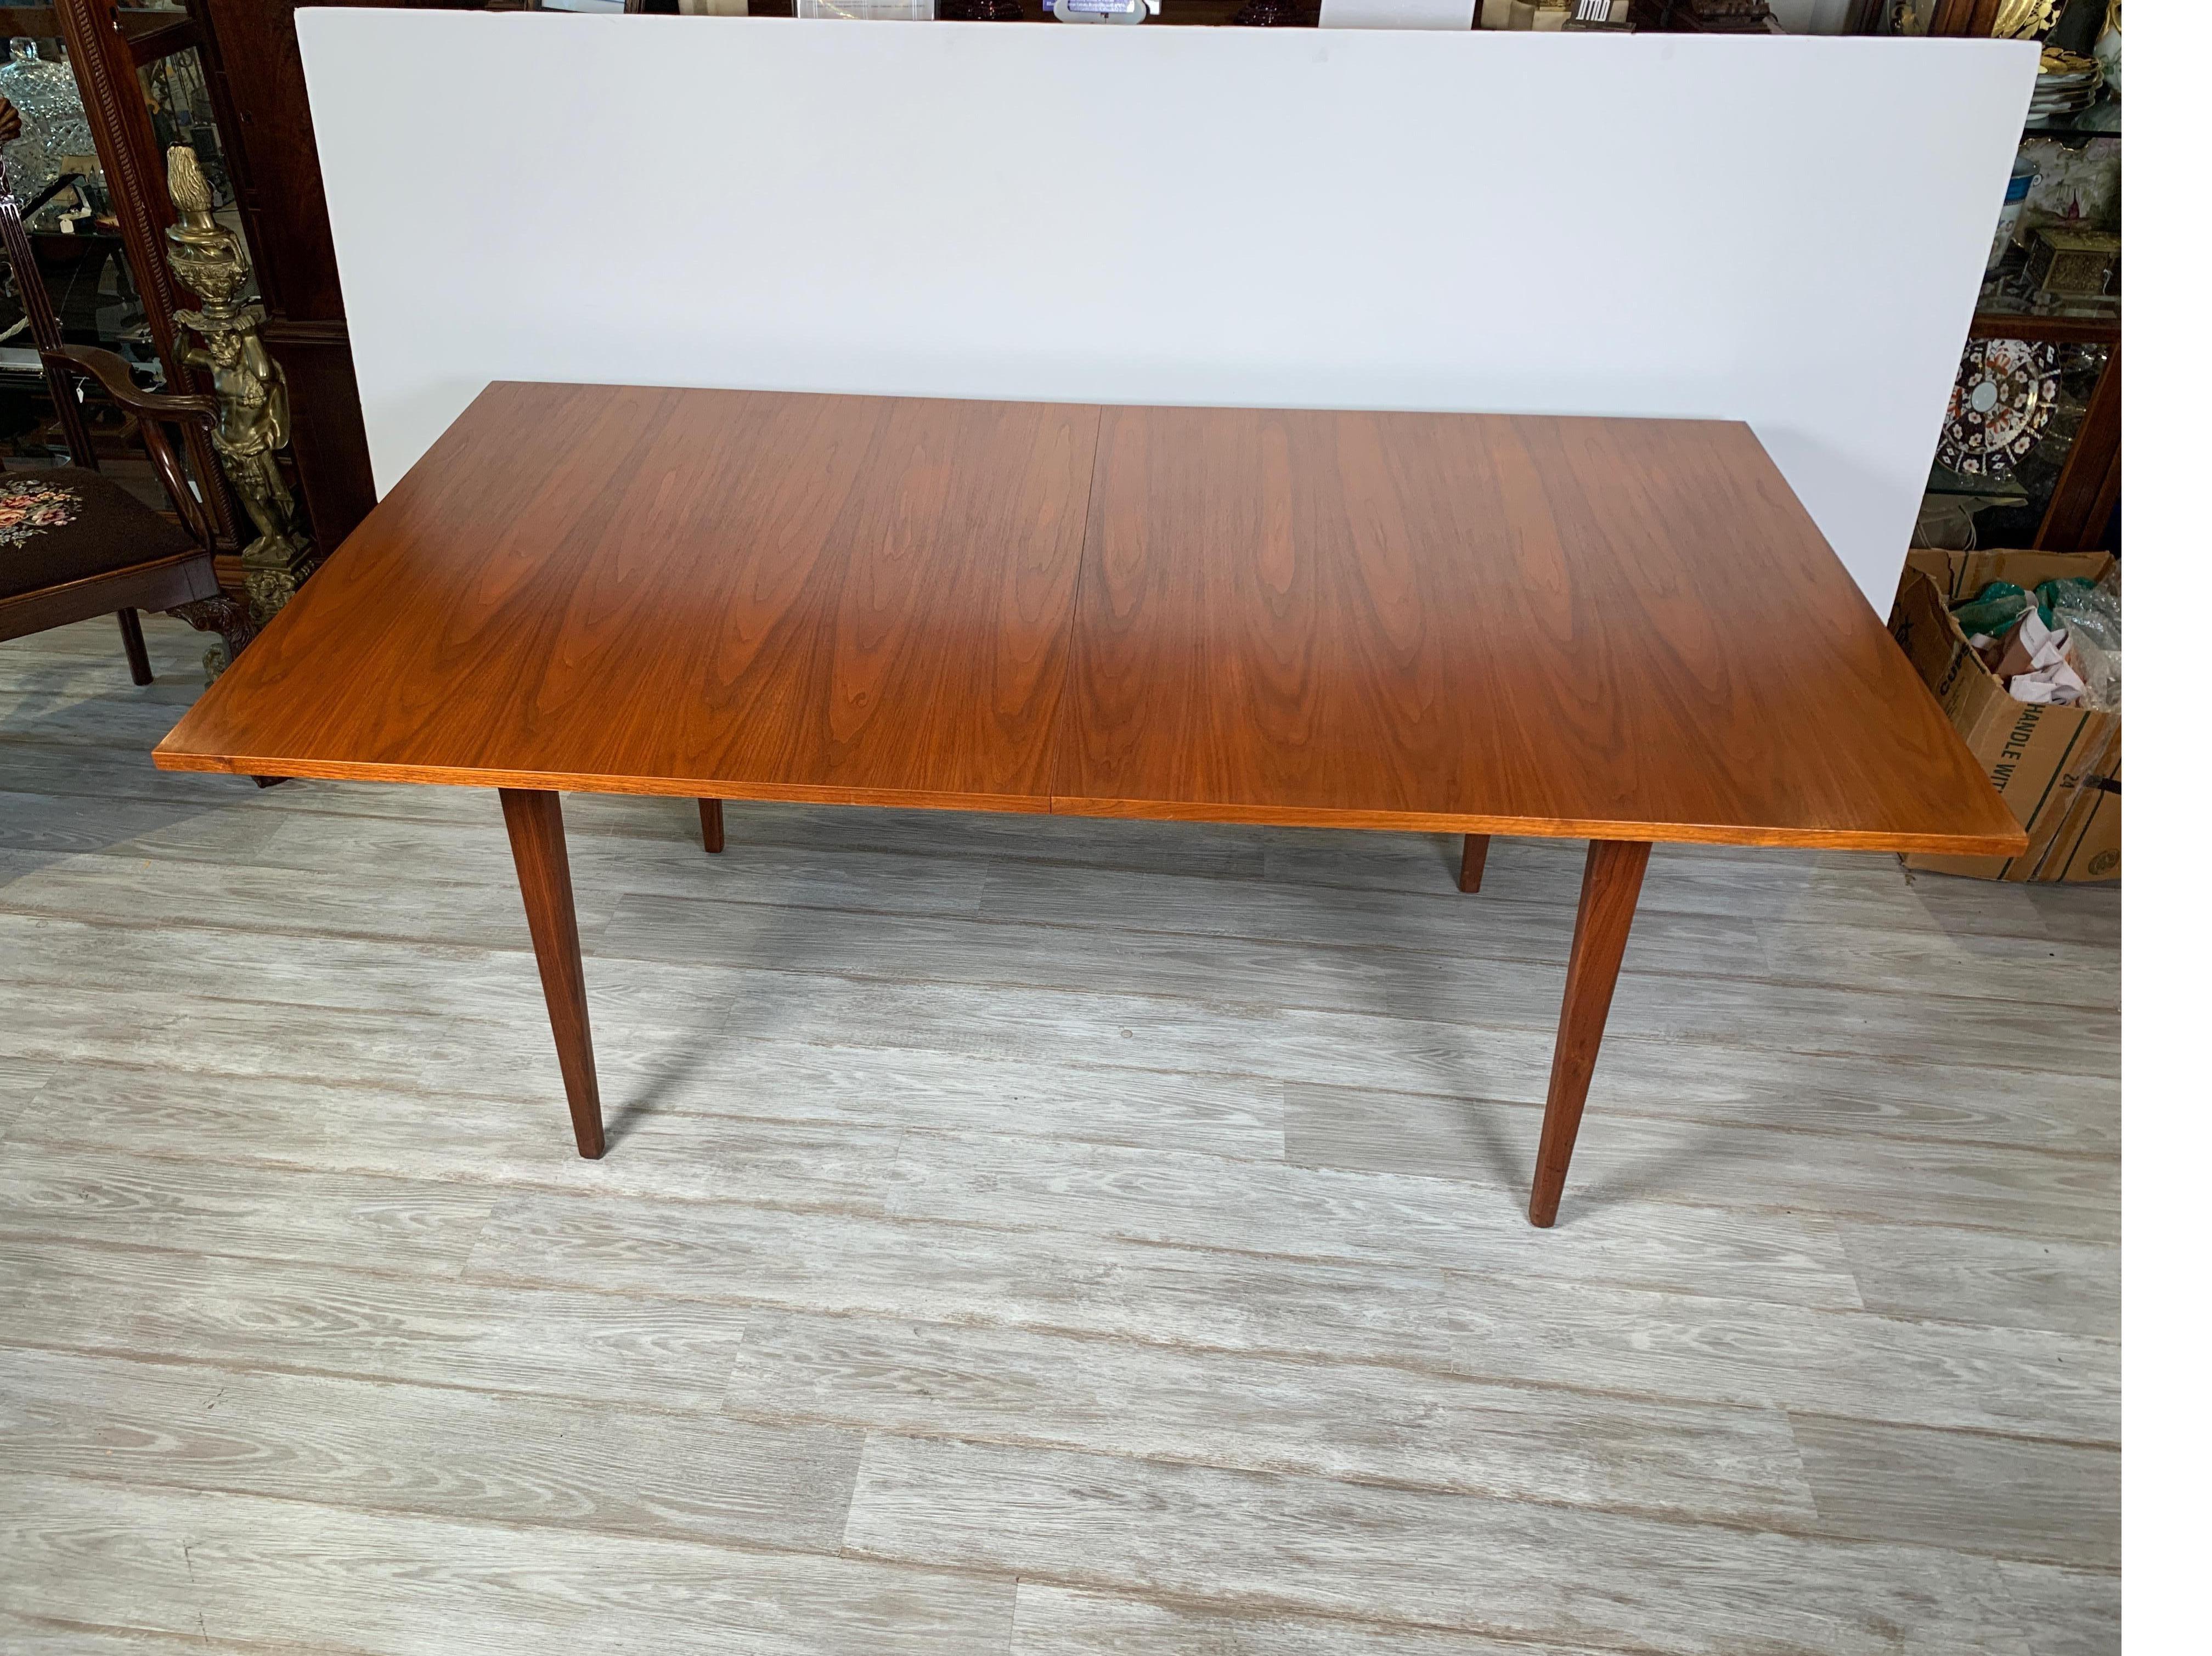 Uncommon and gorgeous walnut dining table by George Nelson for Herman Miller, USA, 1955. In beautiful original condition with minor signs of well-cared-for use. The table is 72